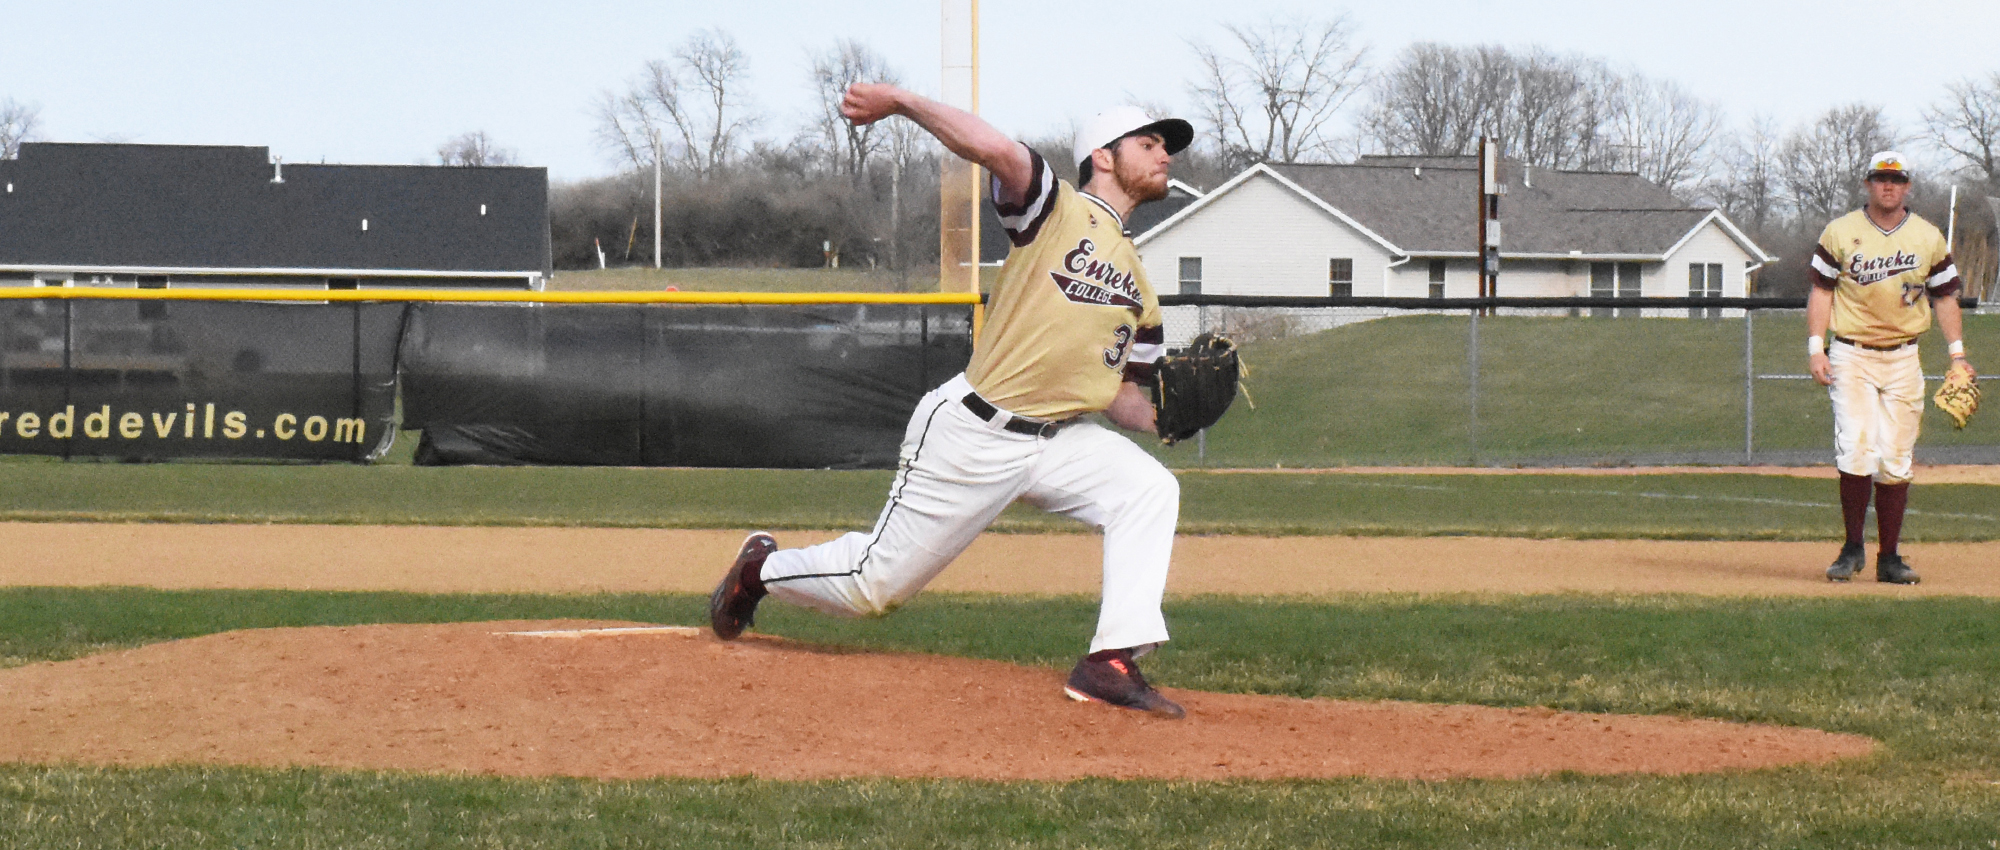 Red Devils Overcome Westminster in Series Opener, 4-3